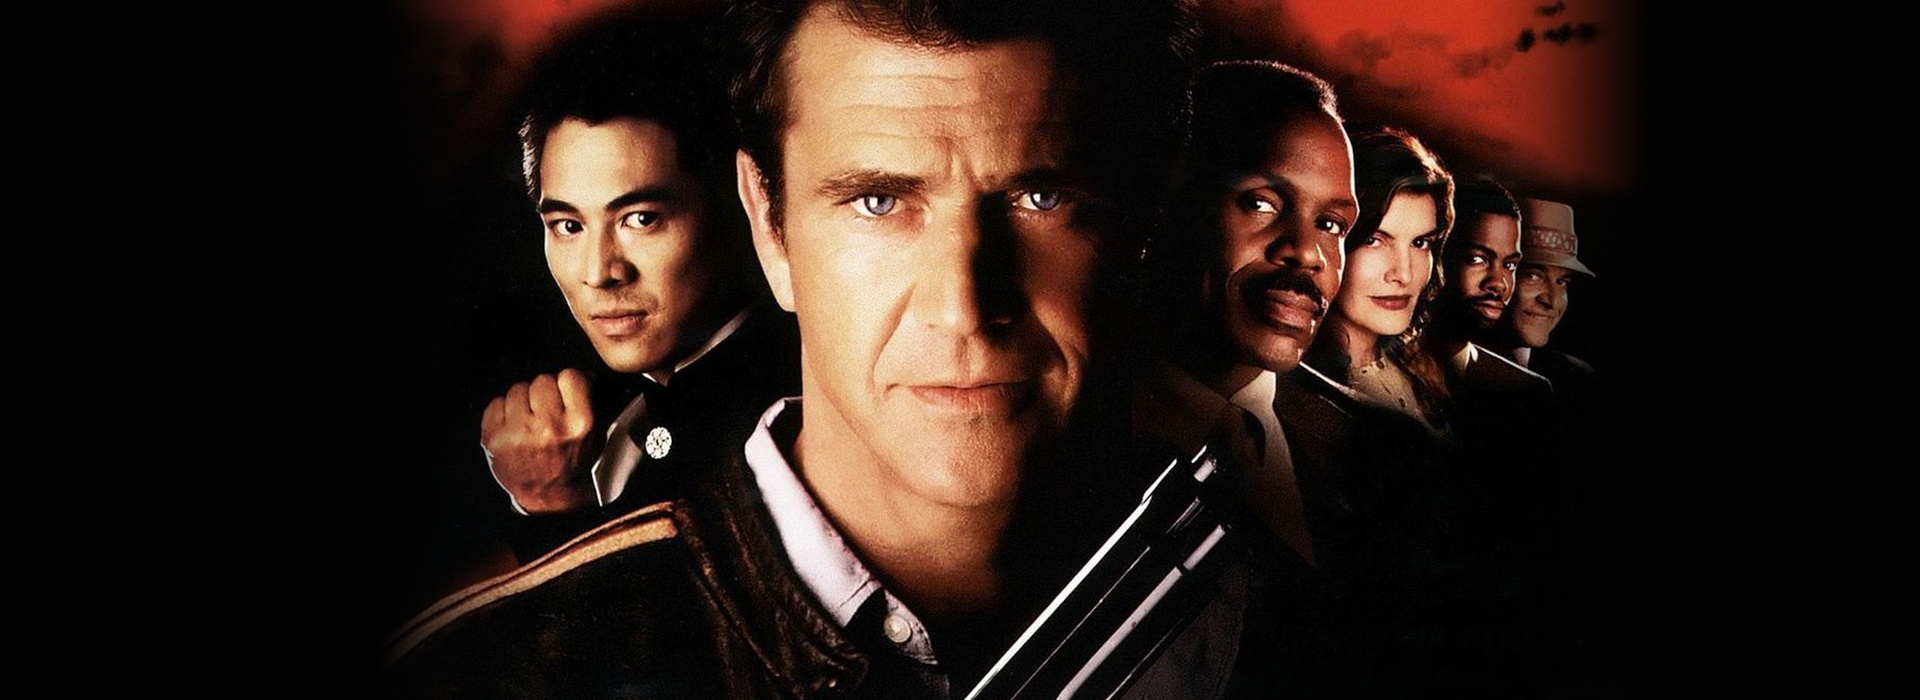 Movie poster Lethal Weapon 4